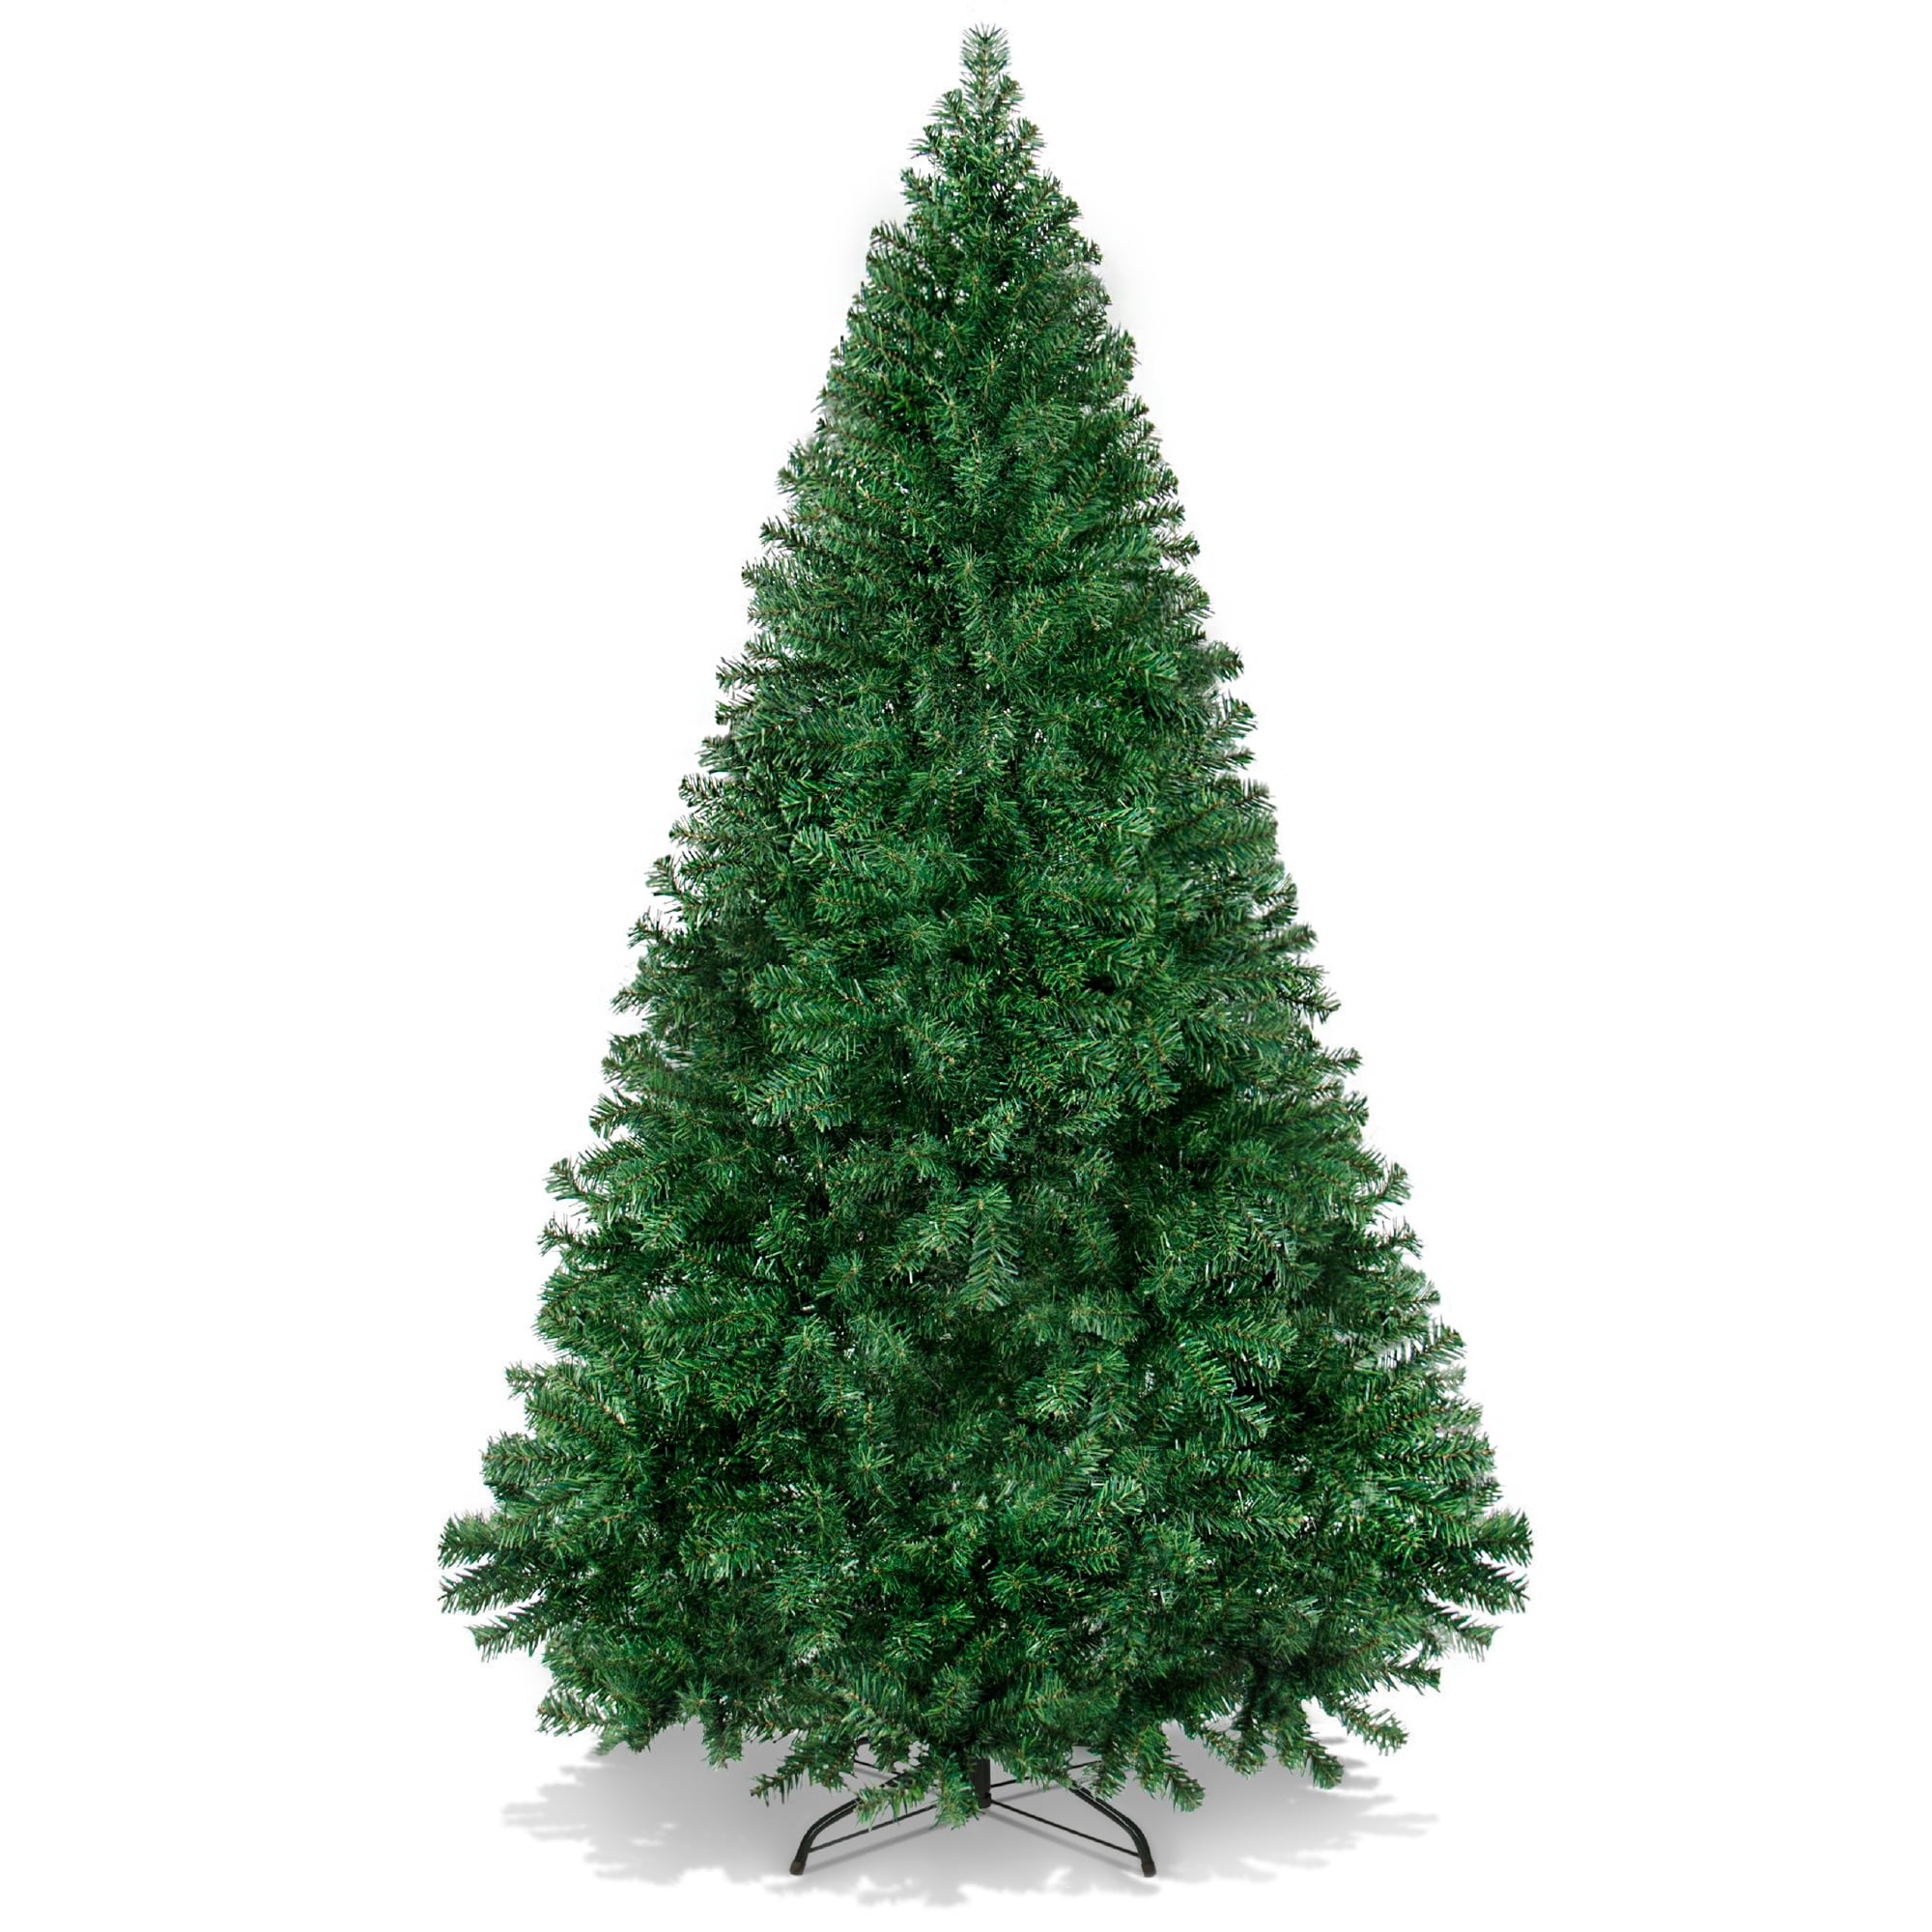 UOUNE 6ft Christmas Tree Artificial Xmas Tree Thick Bushy Pine Tree 650tips with Strong Metal Stand for Home Garden Holiday（Green）